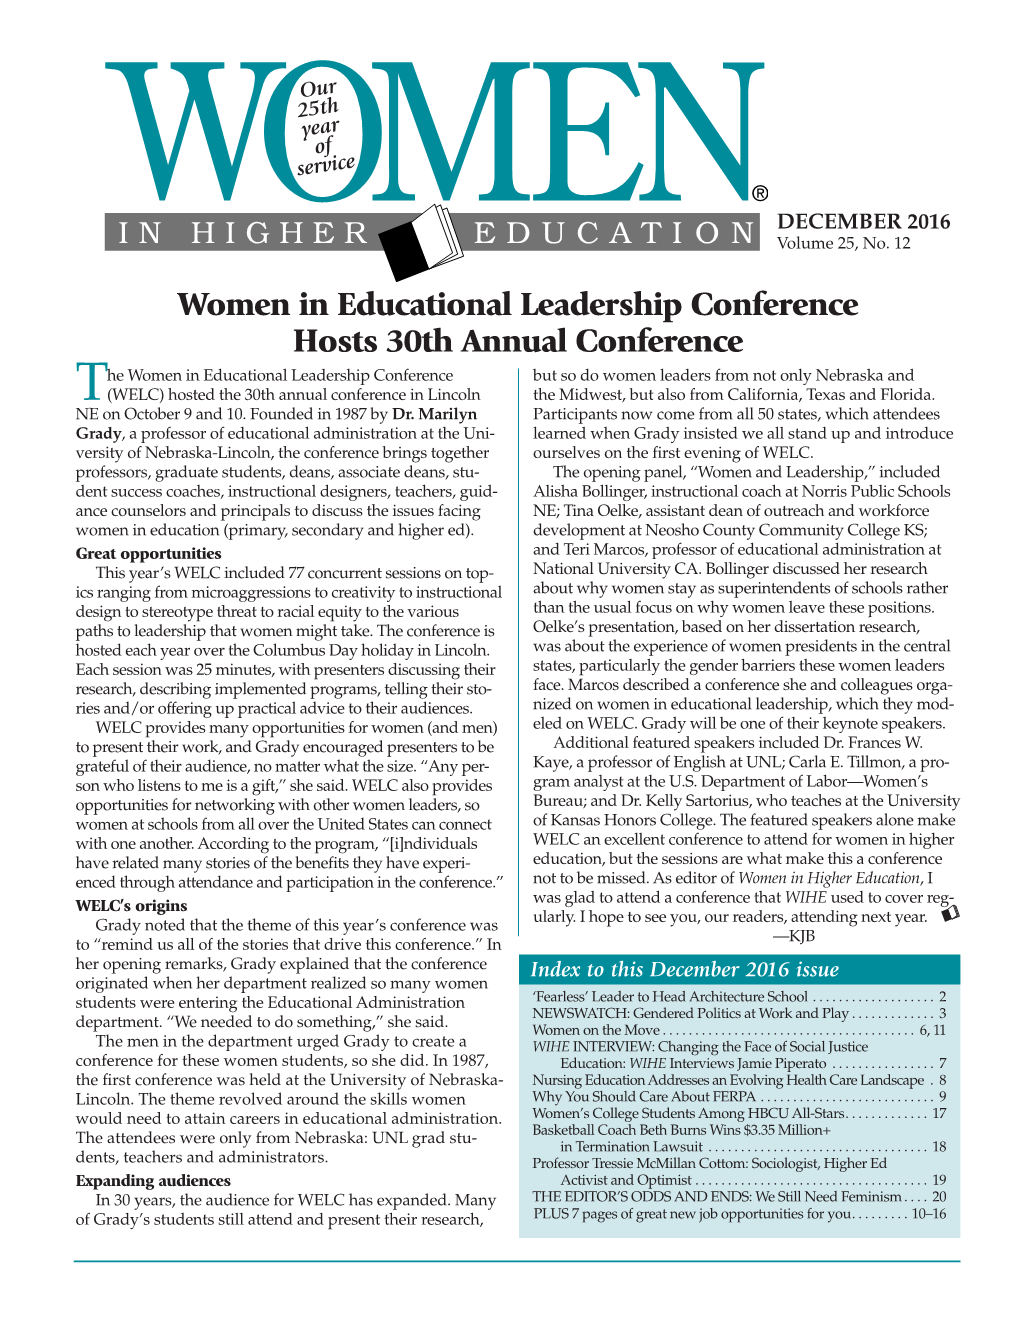 Women in Educational Leadership Conference Hosts 30Th Annual